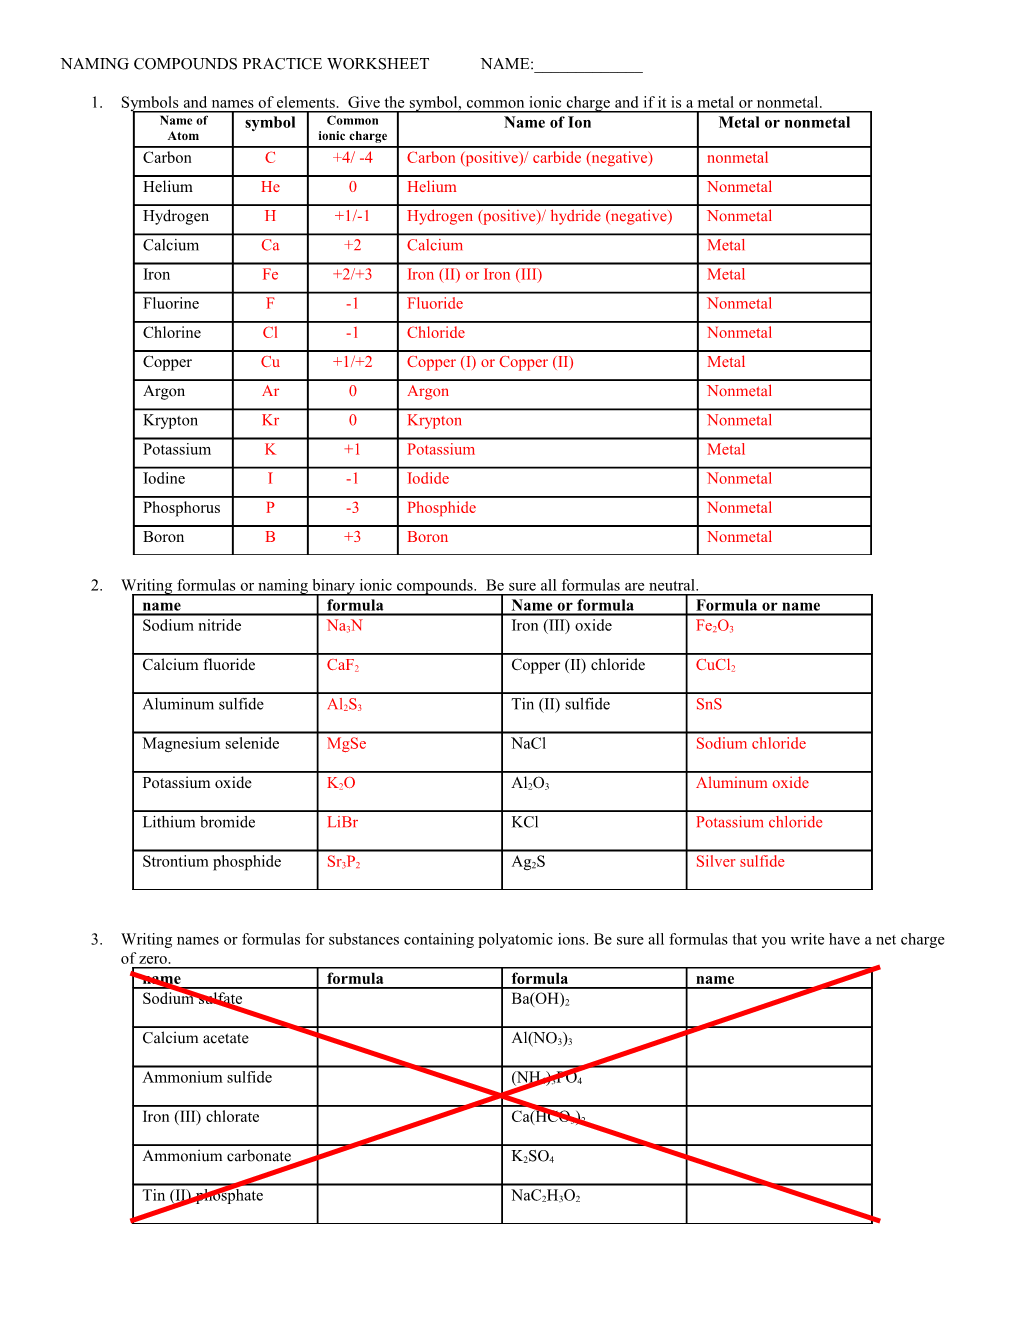 Naming Compounds Practice Worksheet, Chapter 2